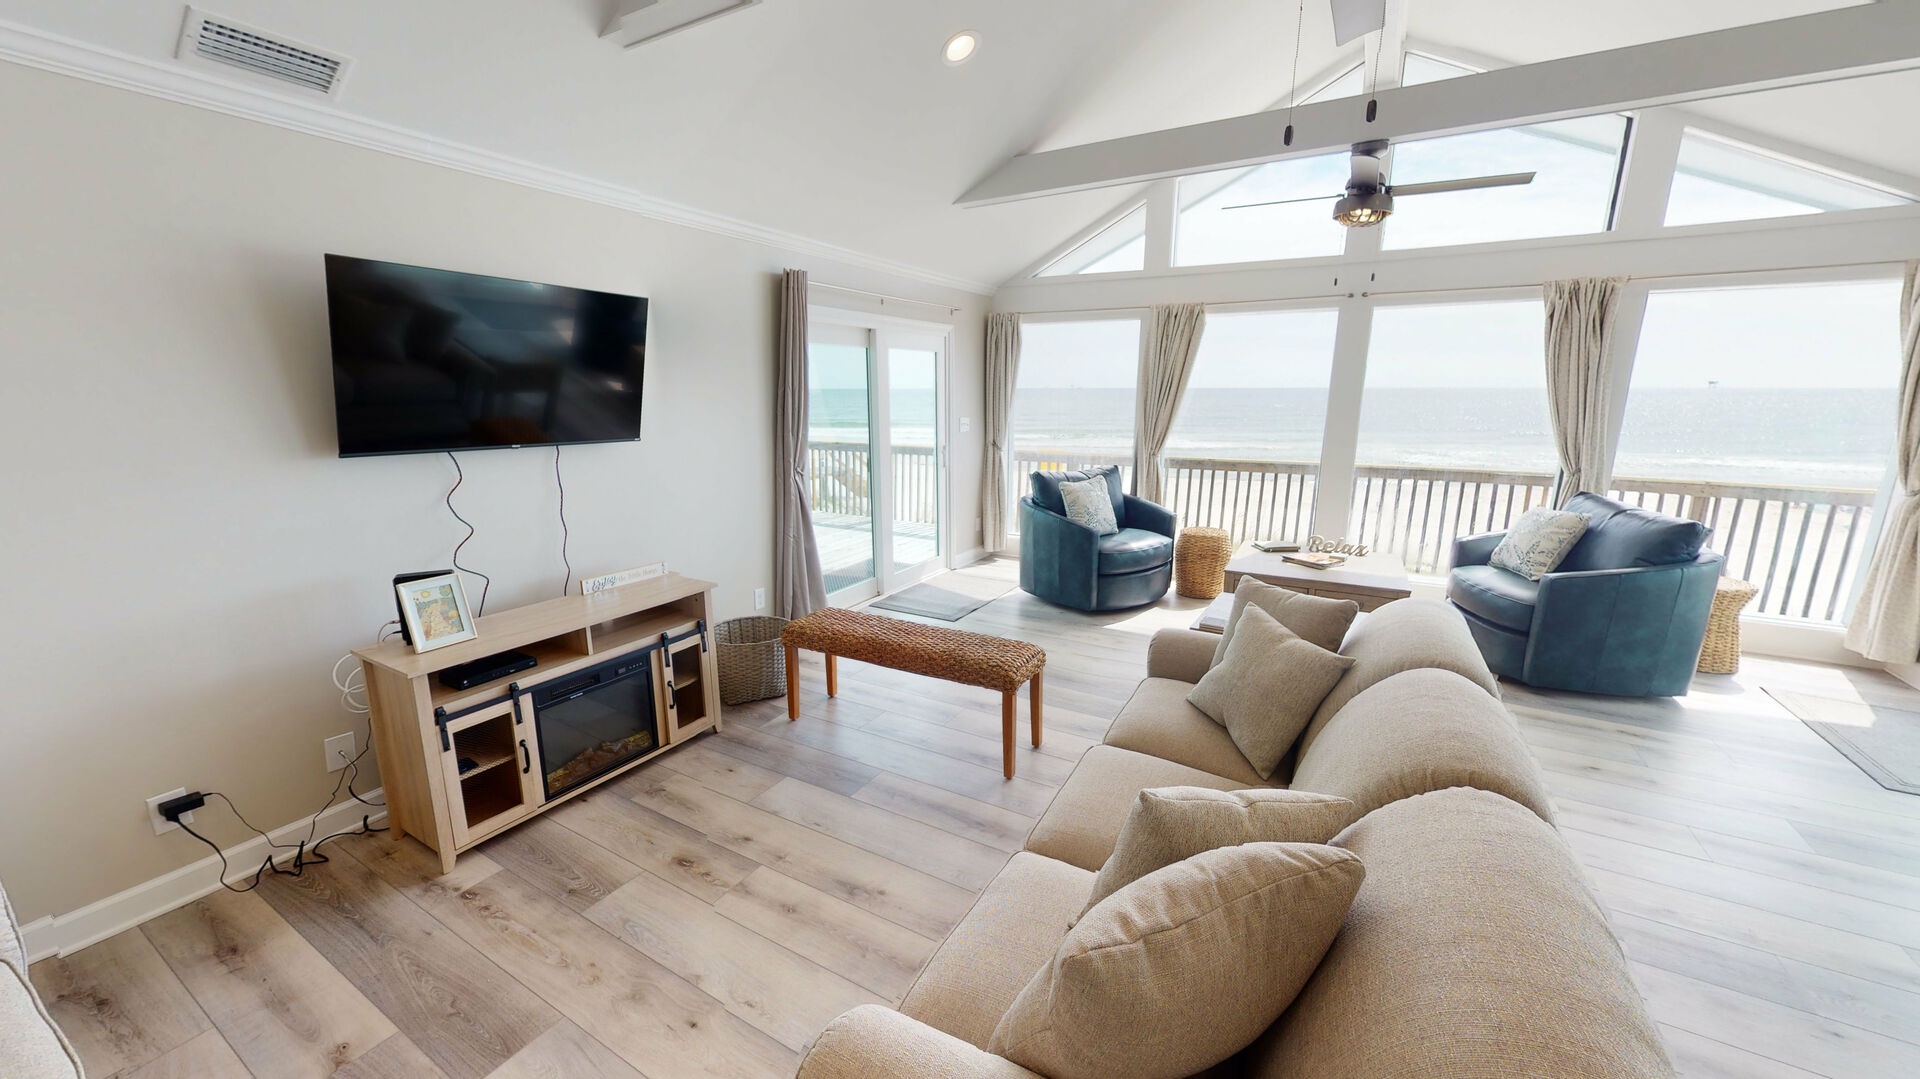 Don't worry, you can still see the Gulf and the TV in this spacious living area